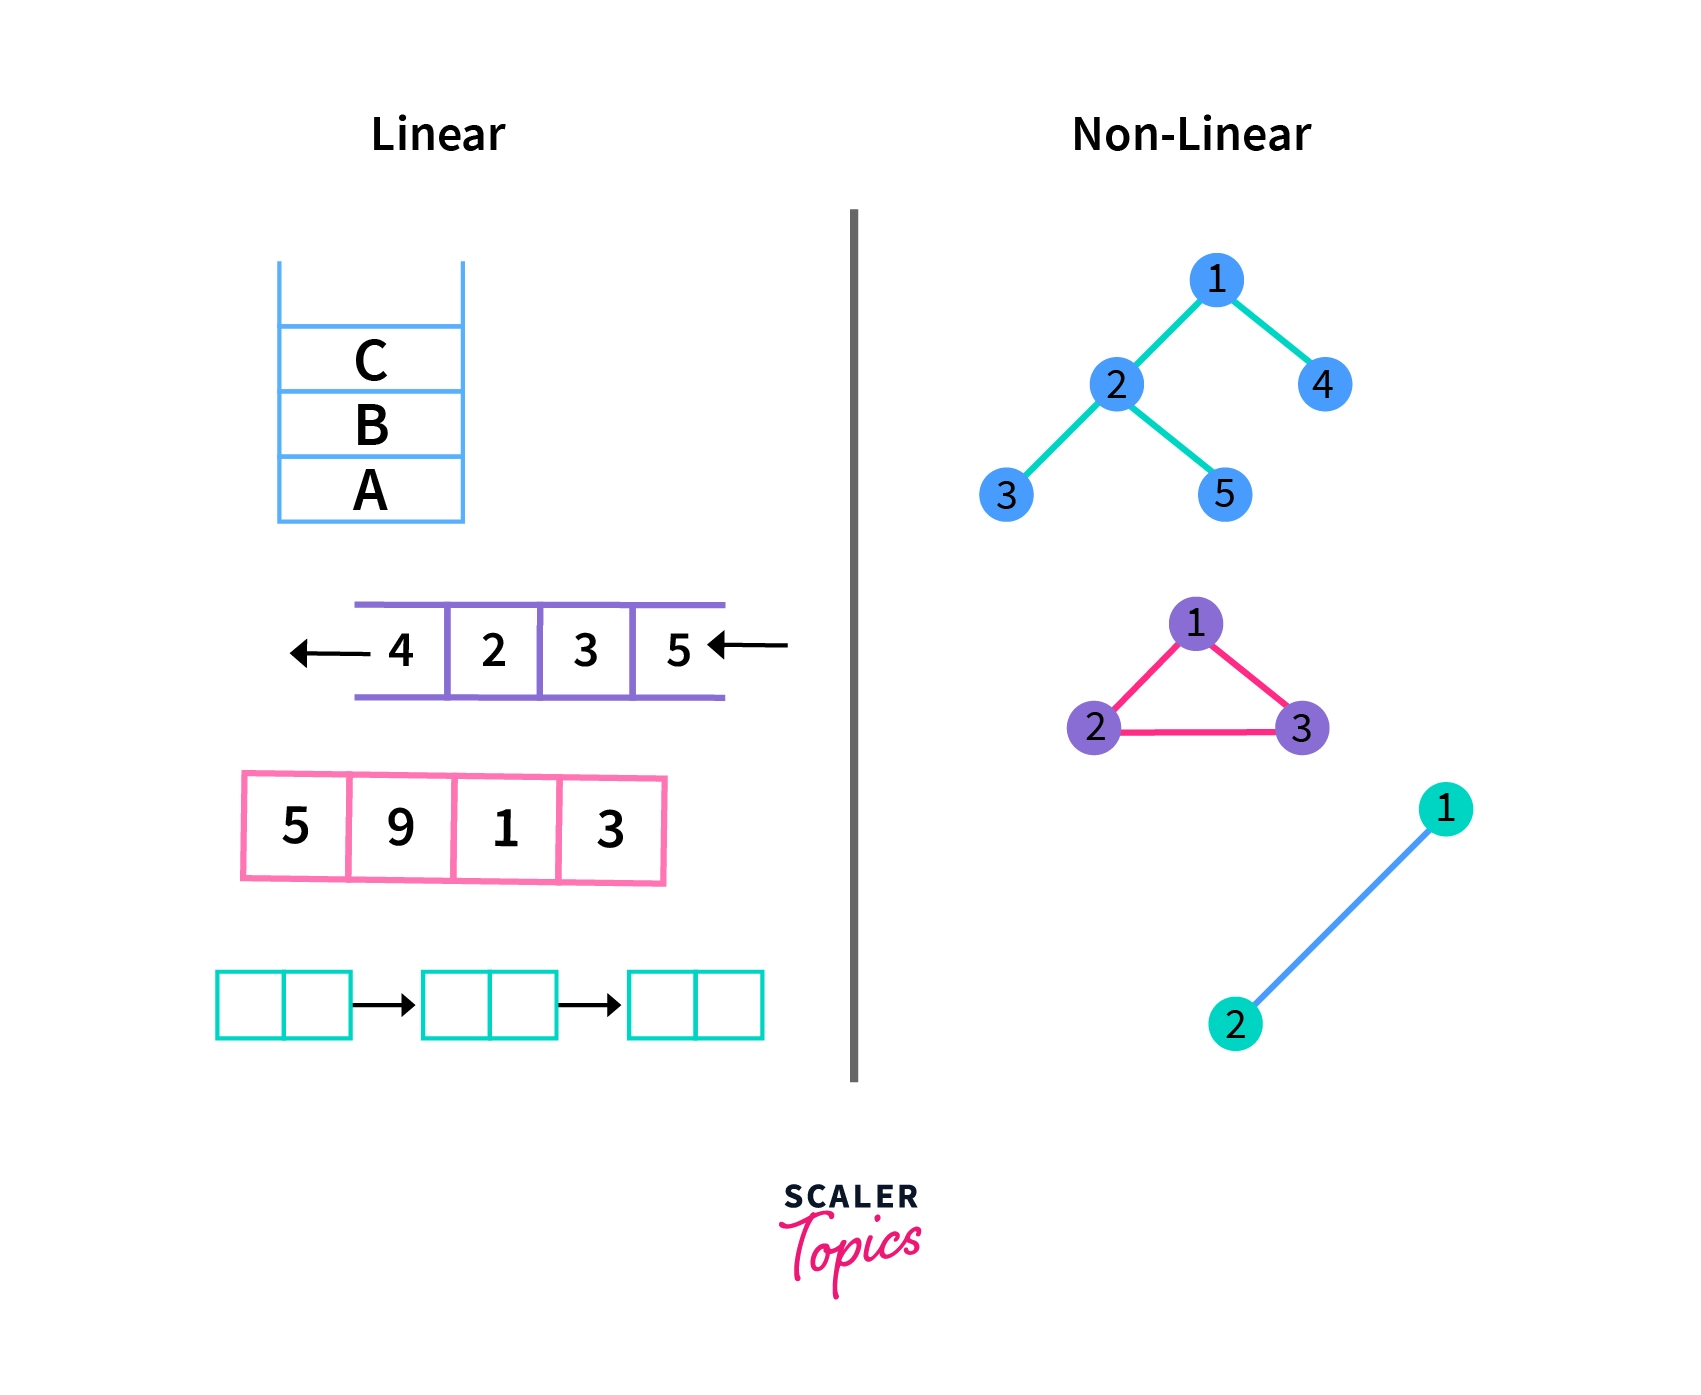 Linear vs Non linear data structures